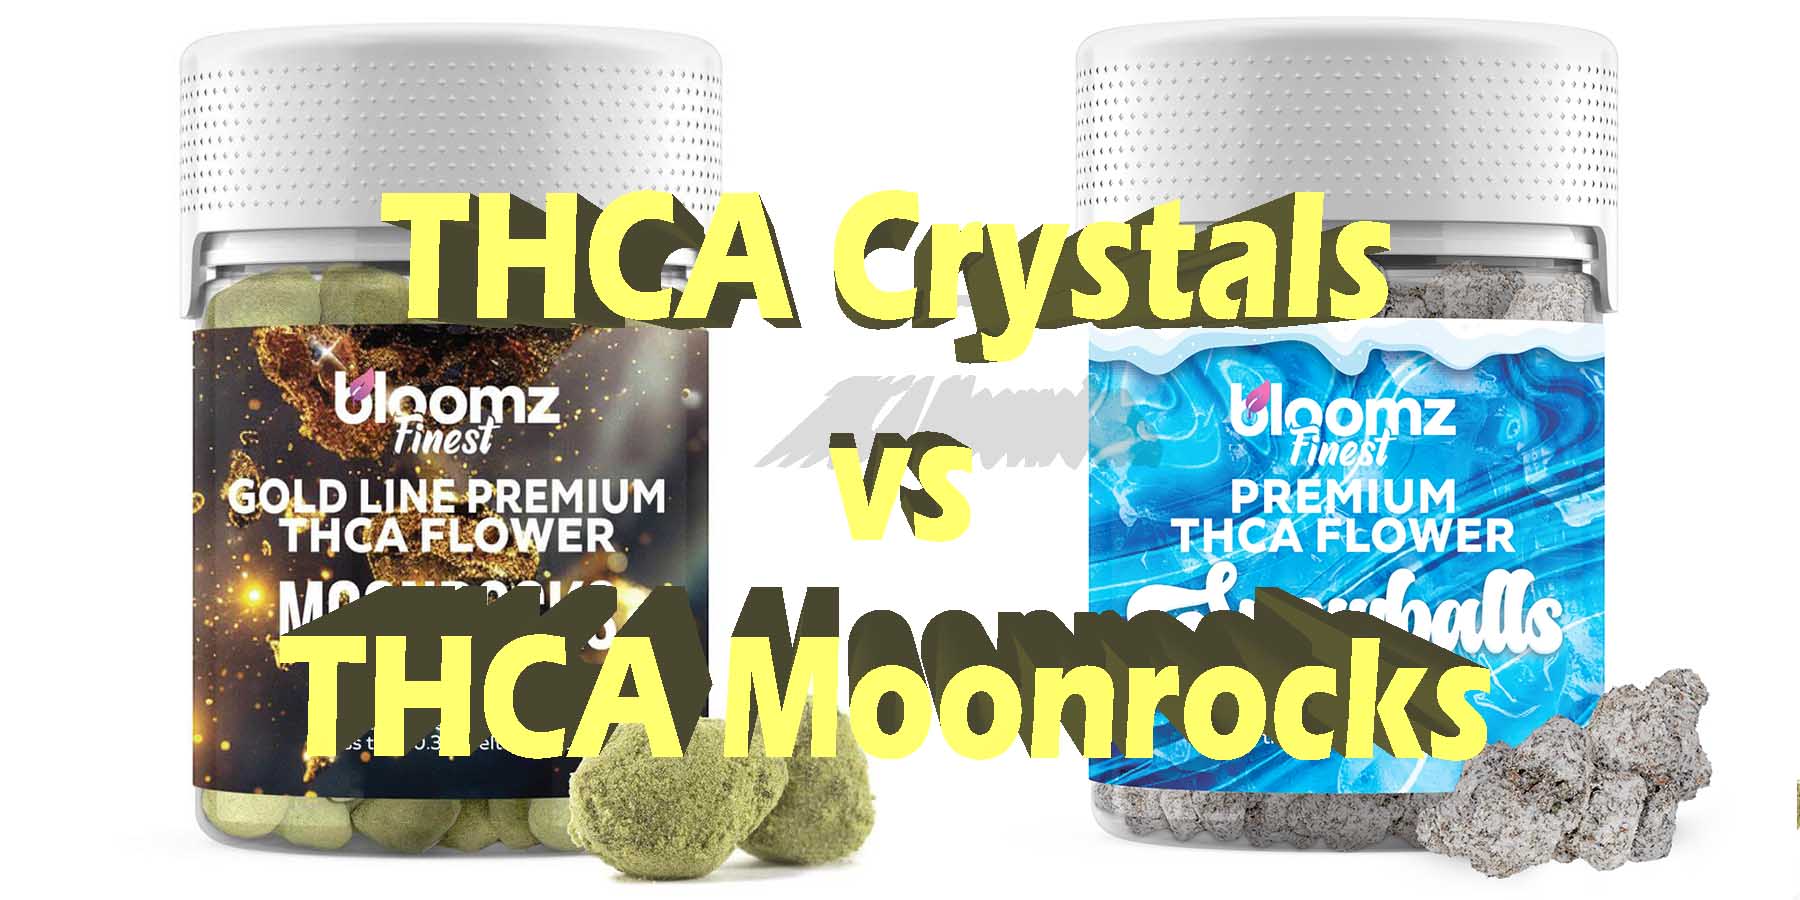 THCA Crystals vs THCA Moonrocks WhereToGet HowToGetNearMe BestPlace LowestPrice Coupon Discount For Smoking Best Smoke Bloomz